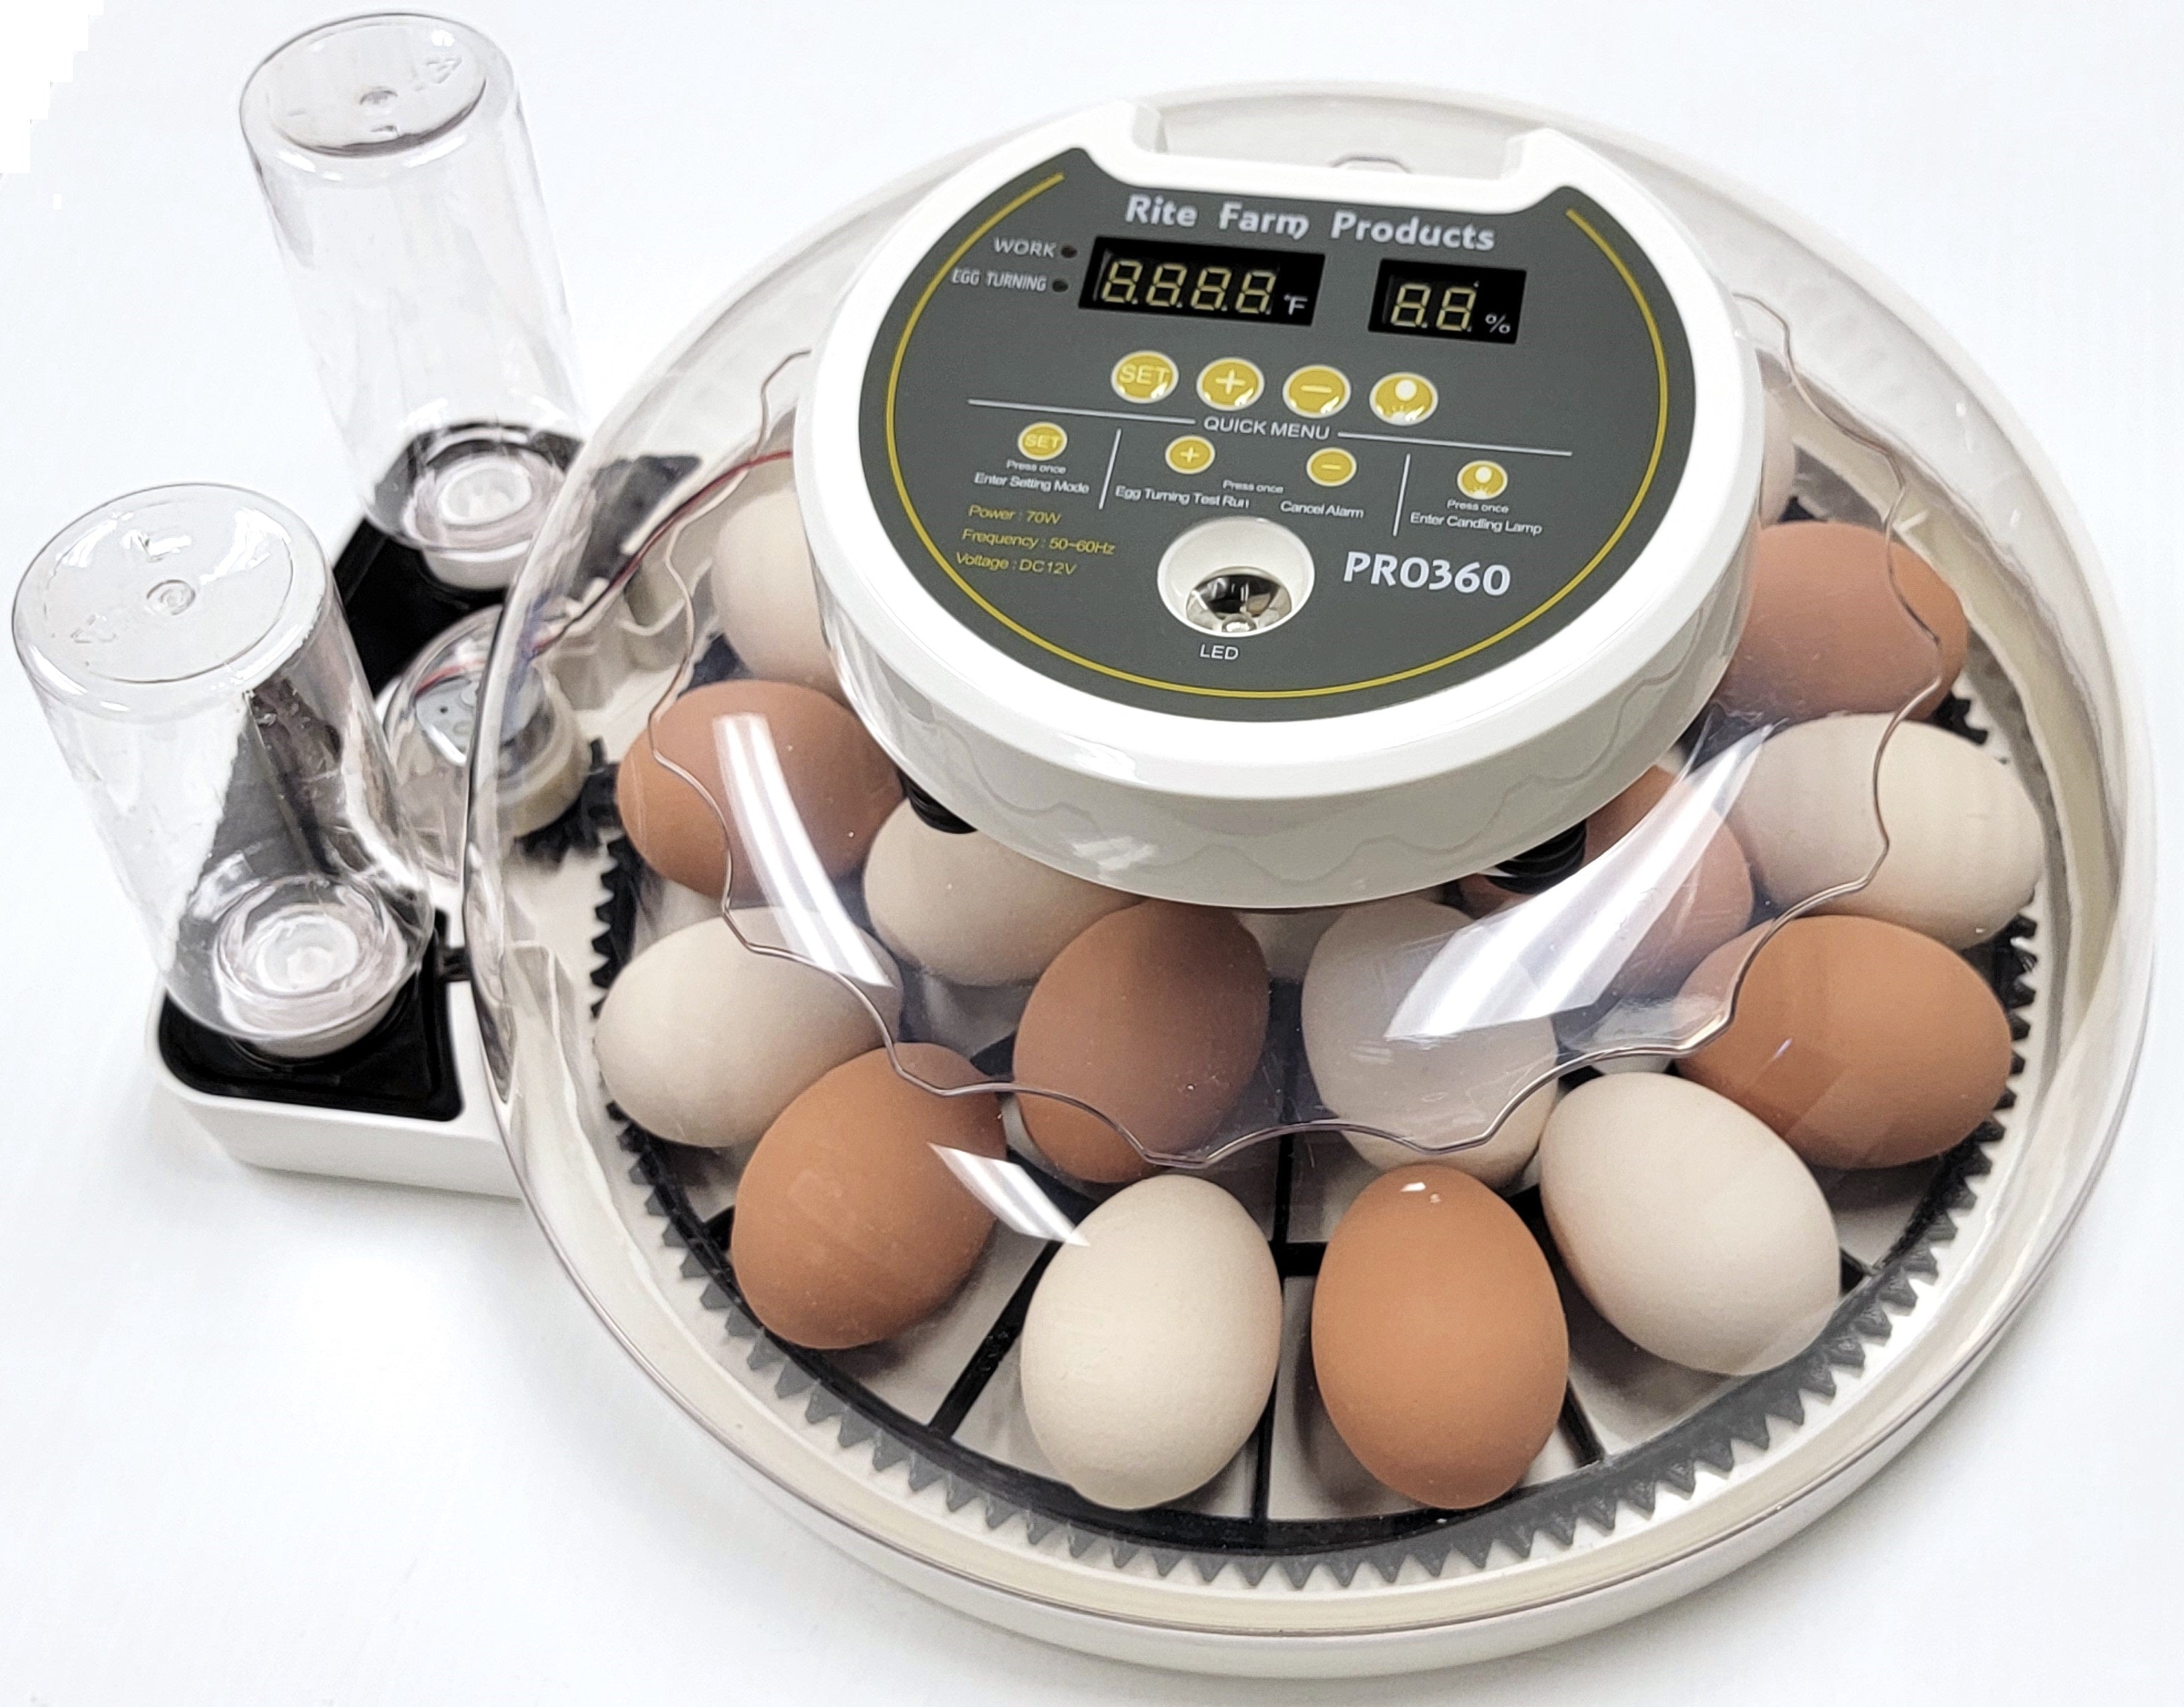 PRO 360 Rite Farm Products 21 Chicken Egg Incubator with 2 Included Egg Turner Trays